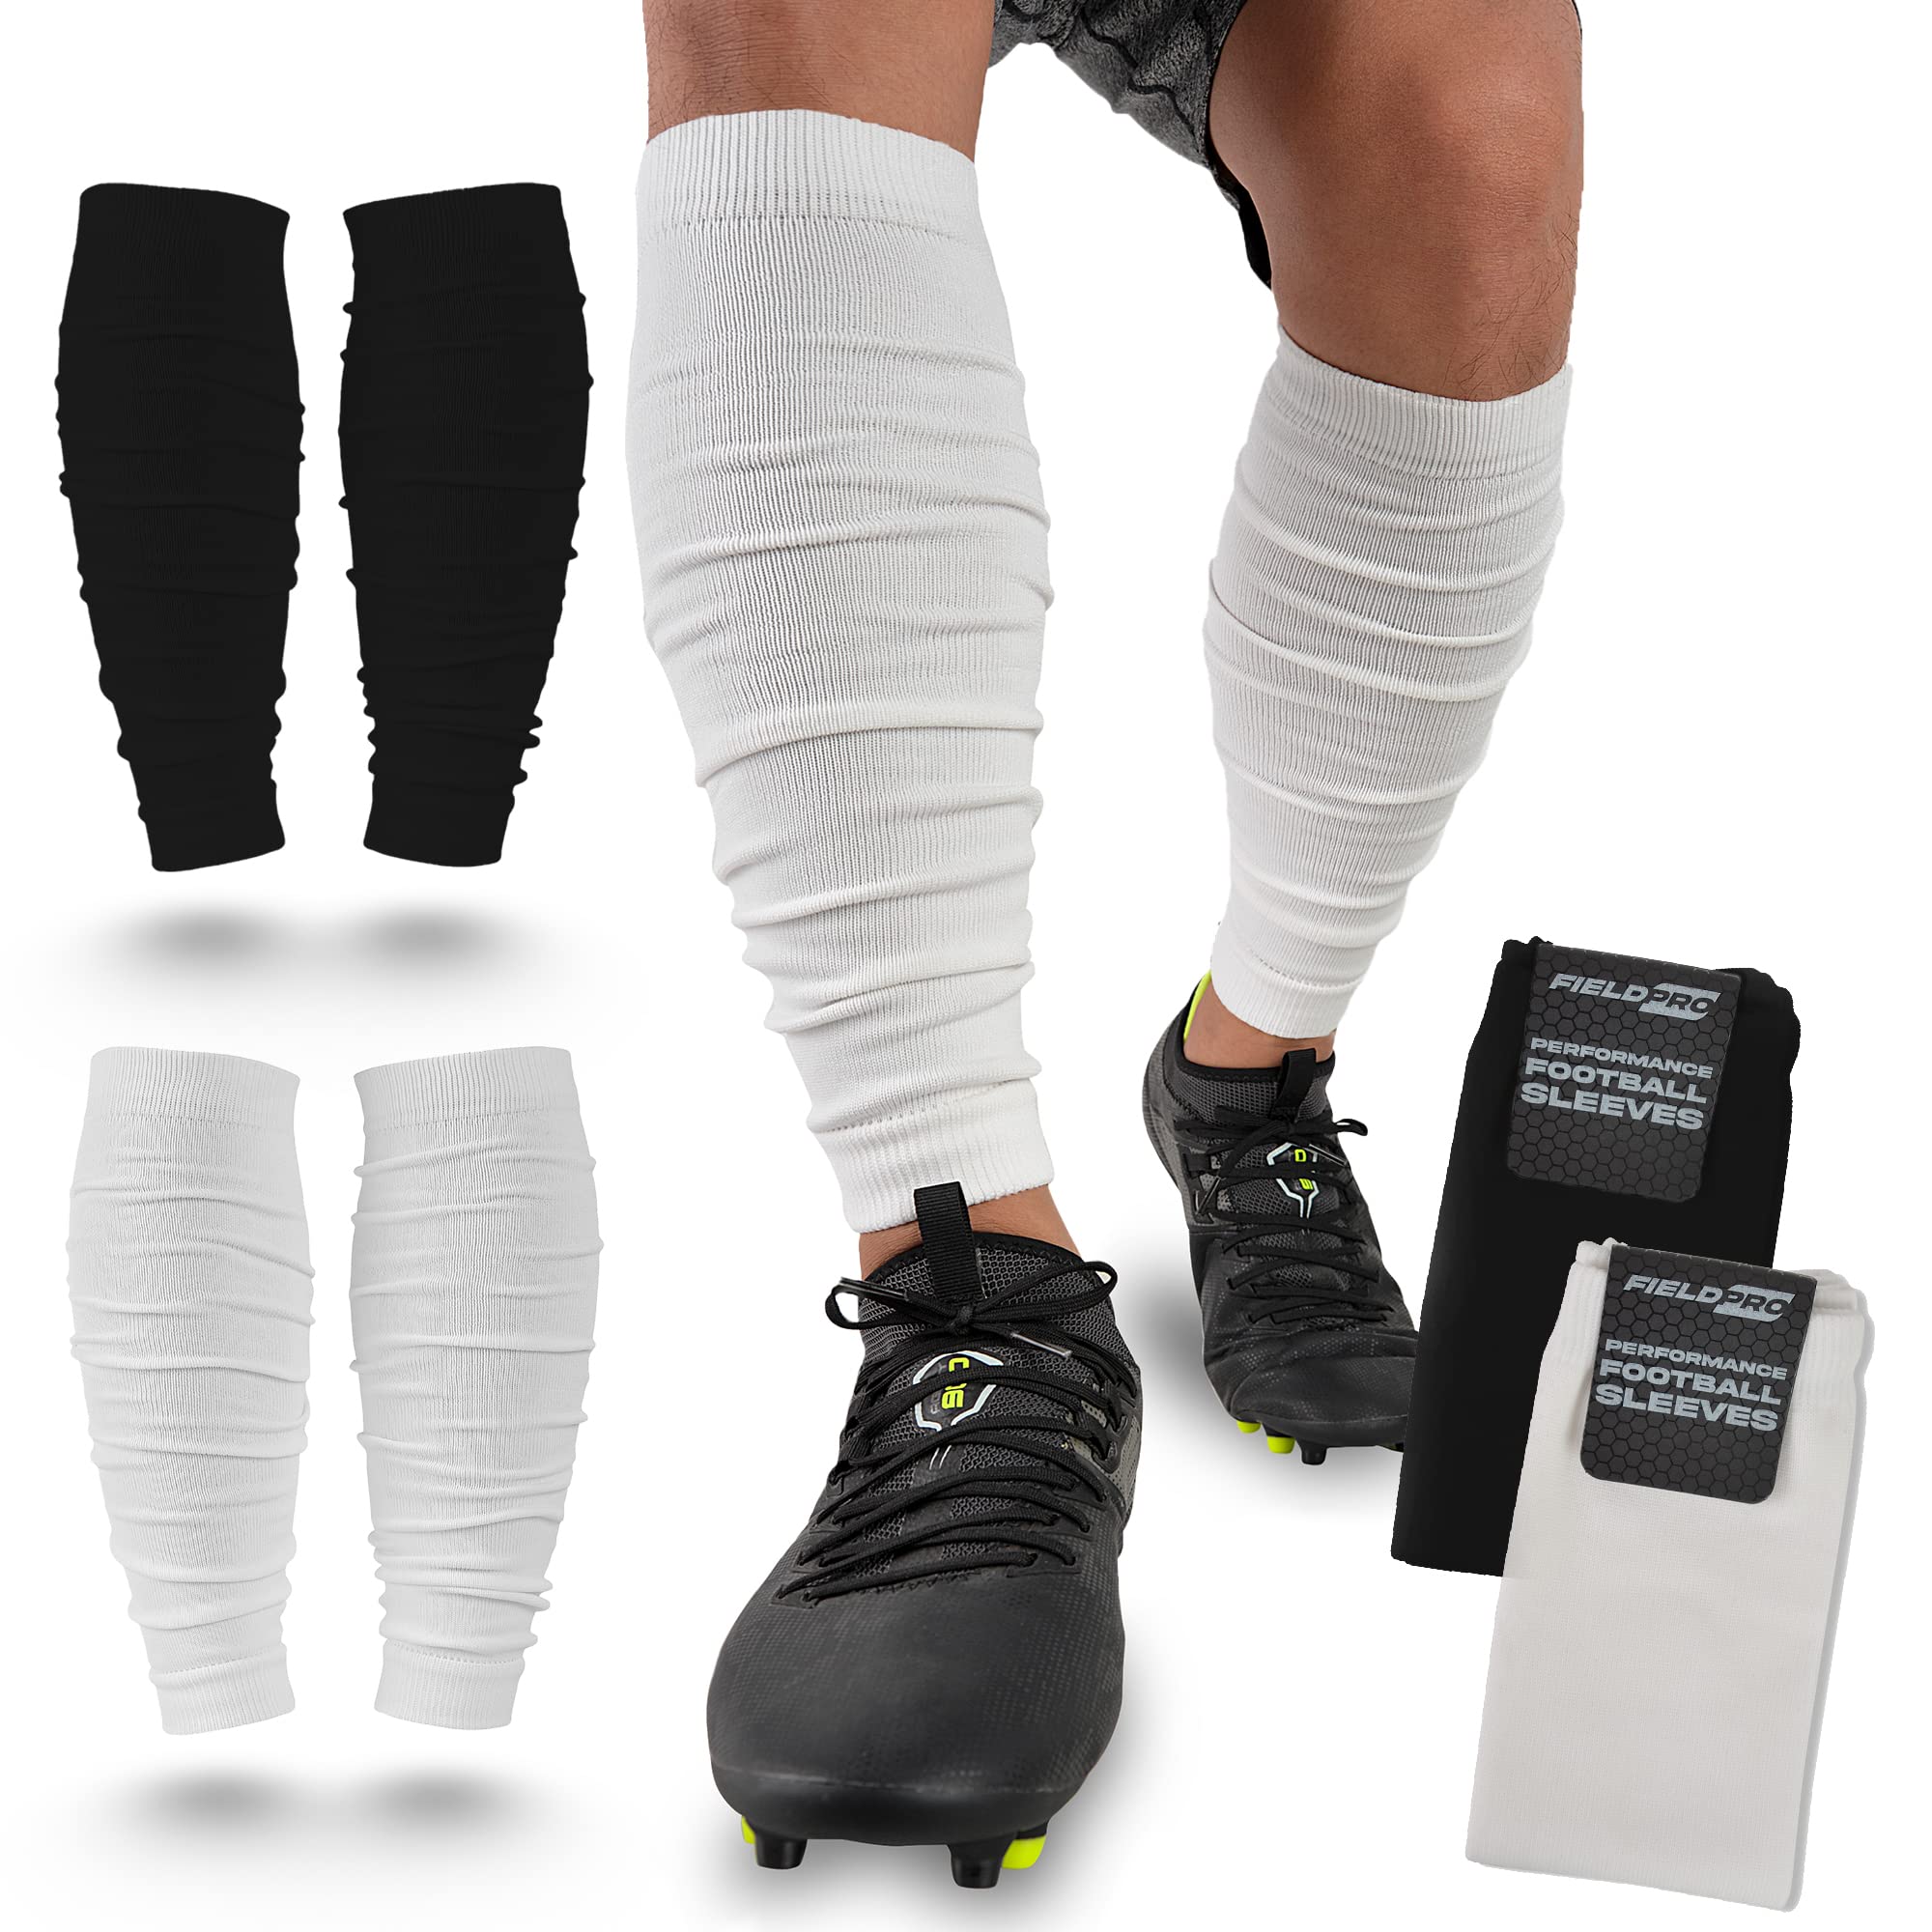 Football Leg Sleeves For Adult Calf Compression Sleeves for Men